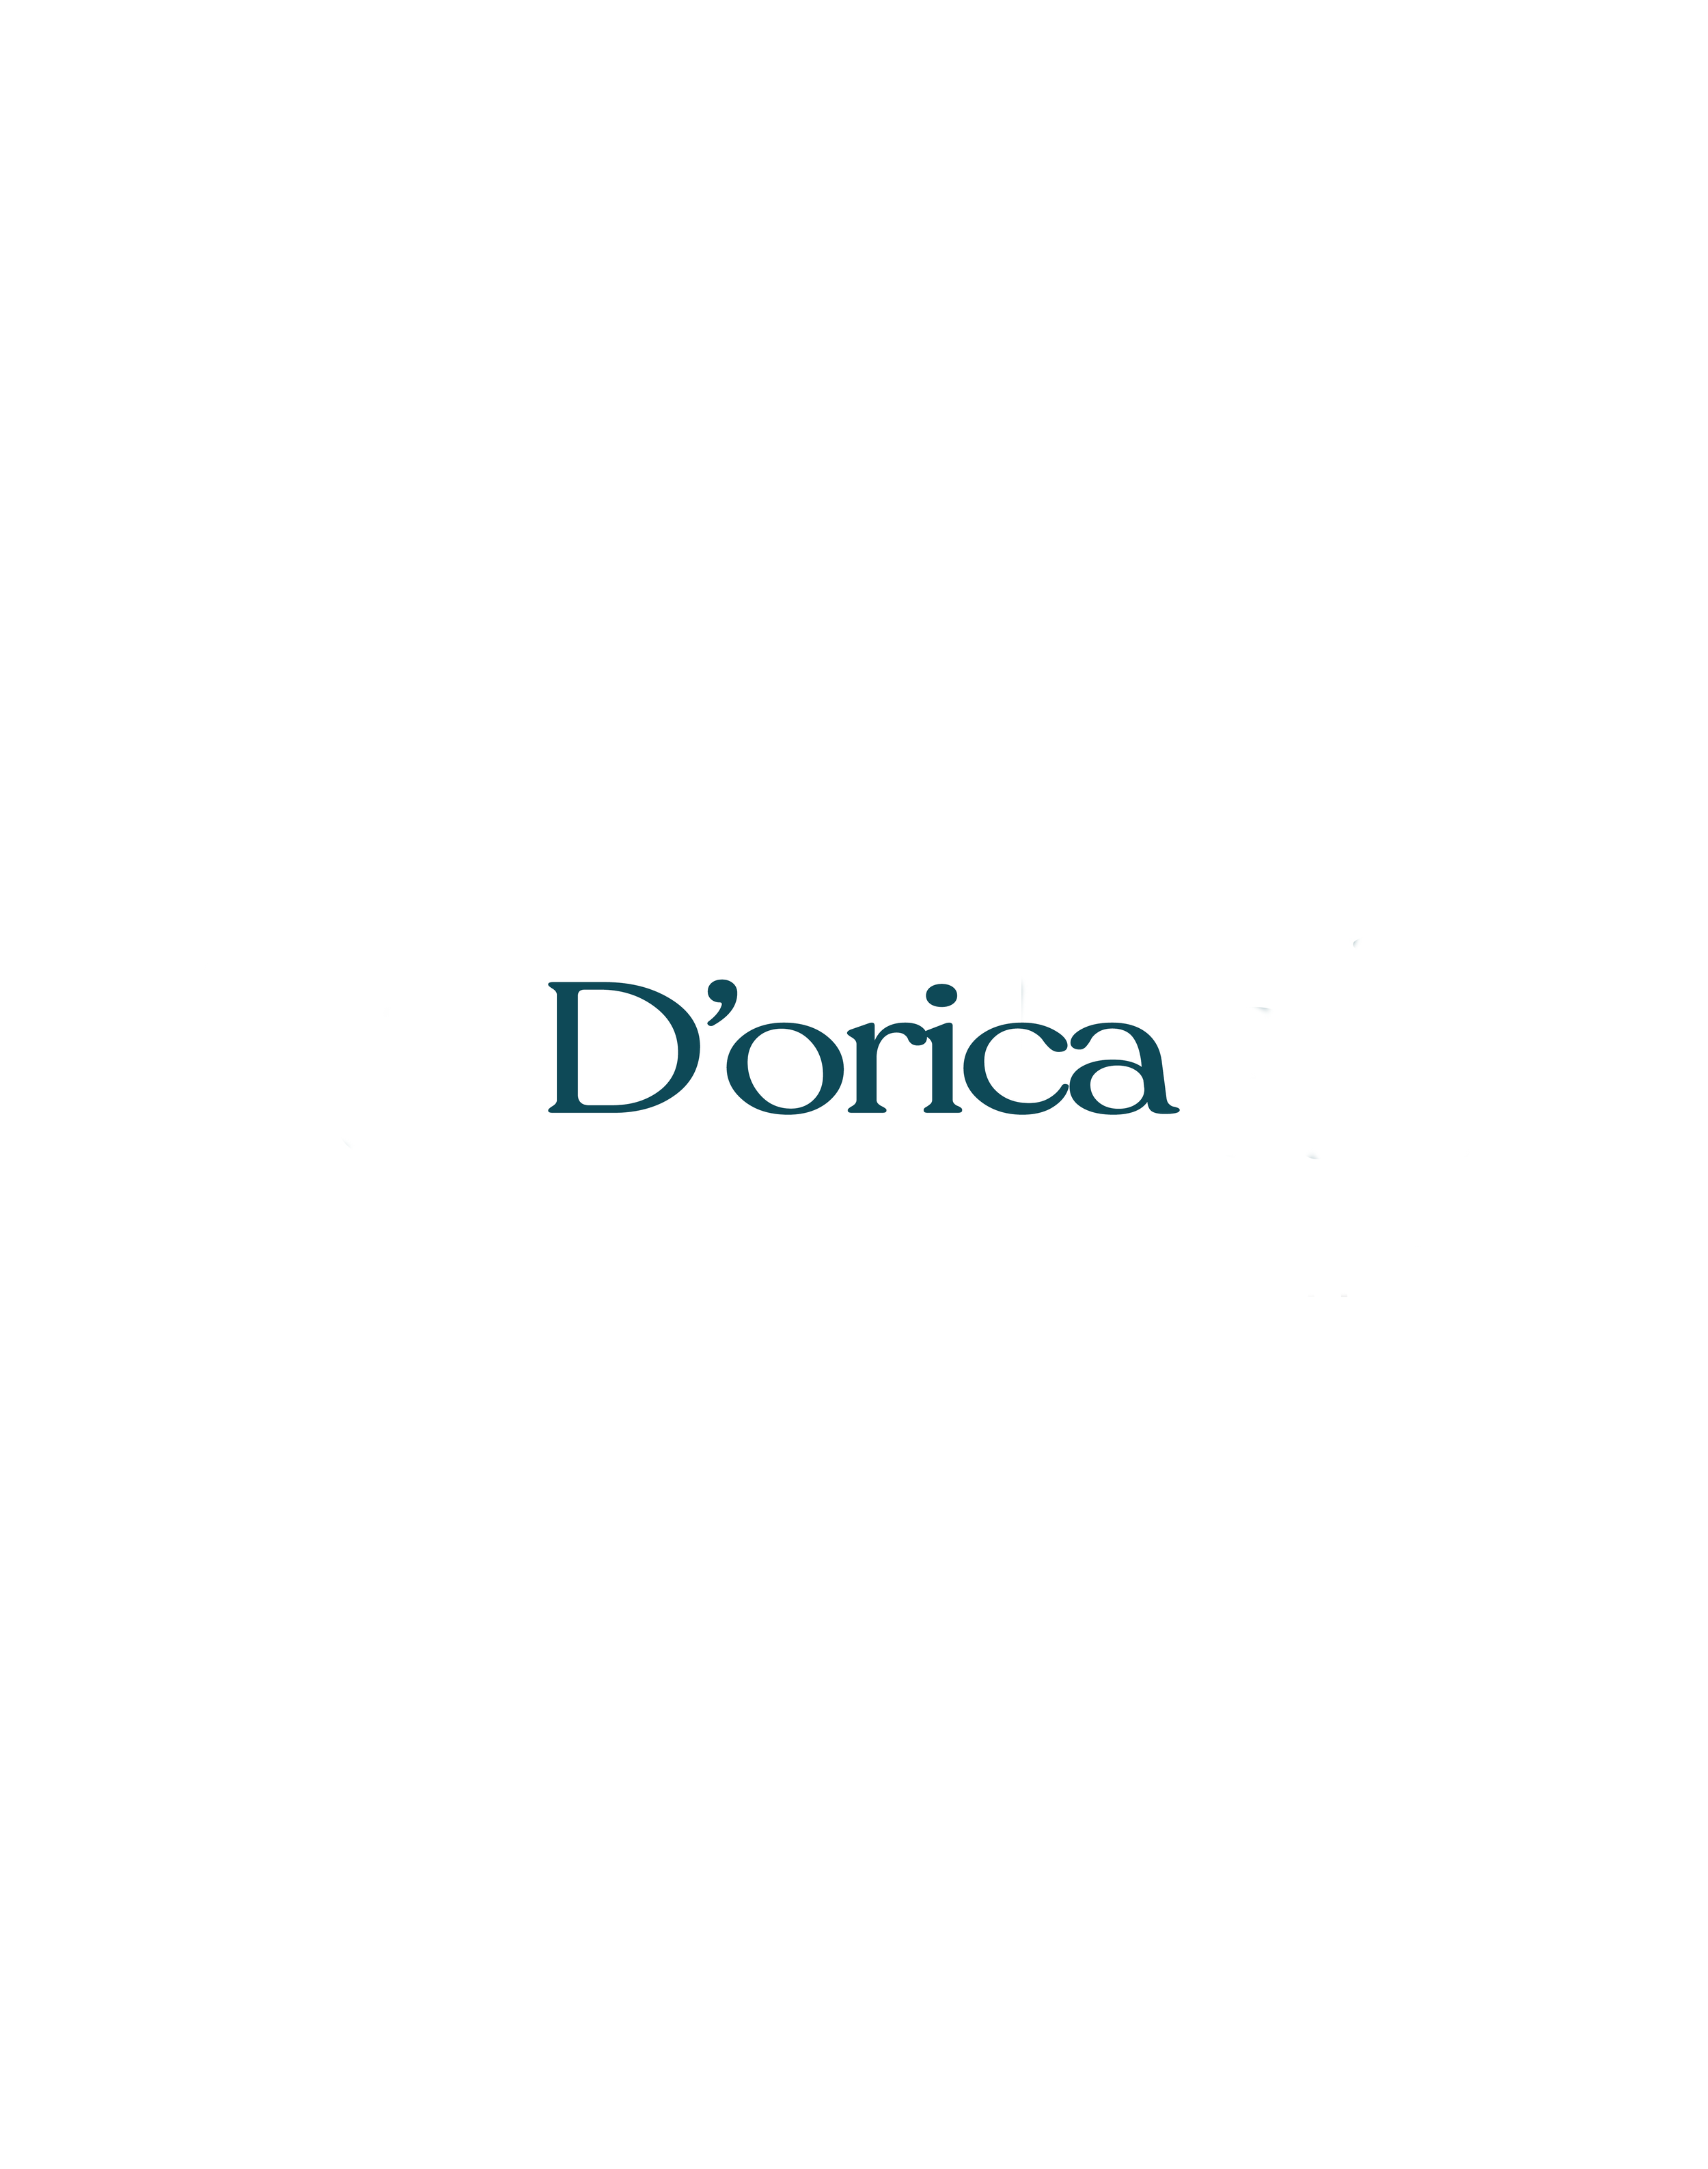 D'orica.png